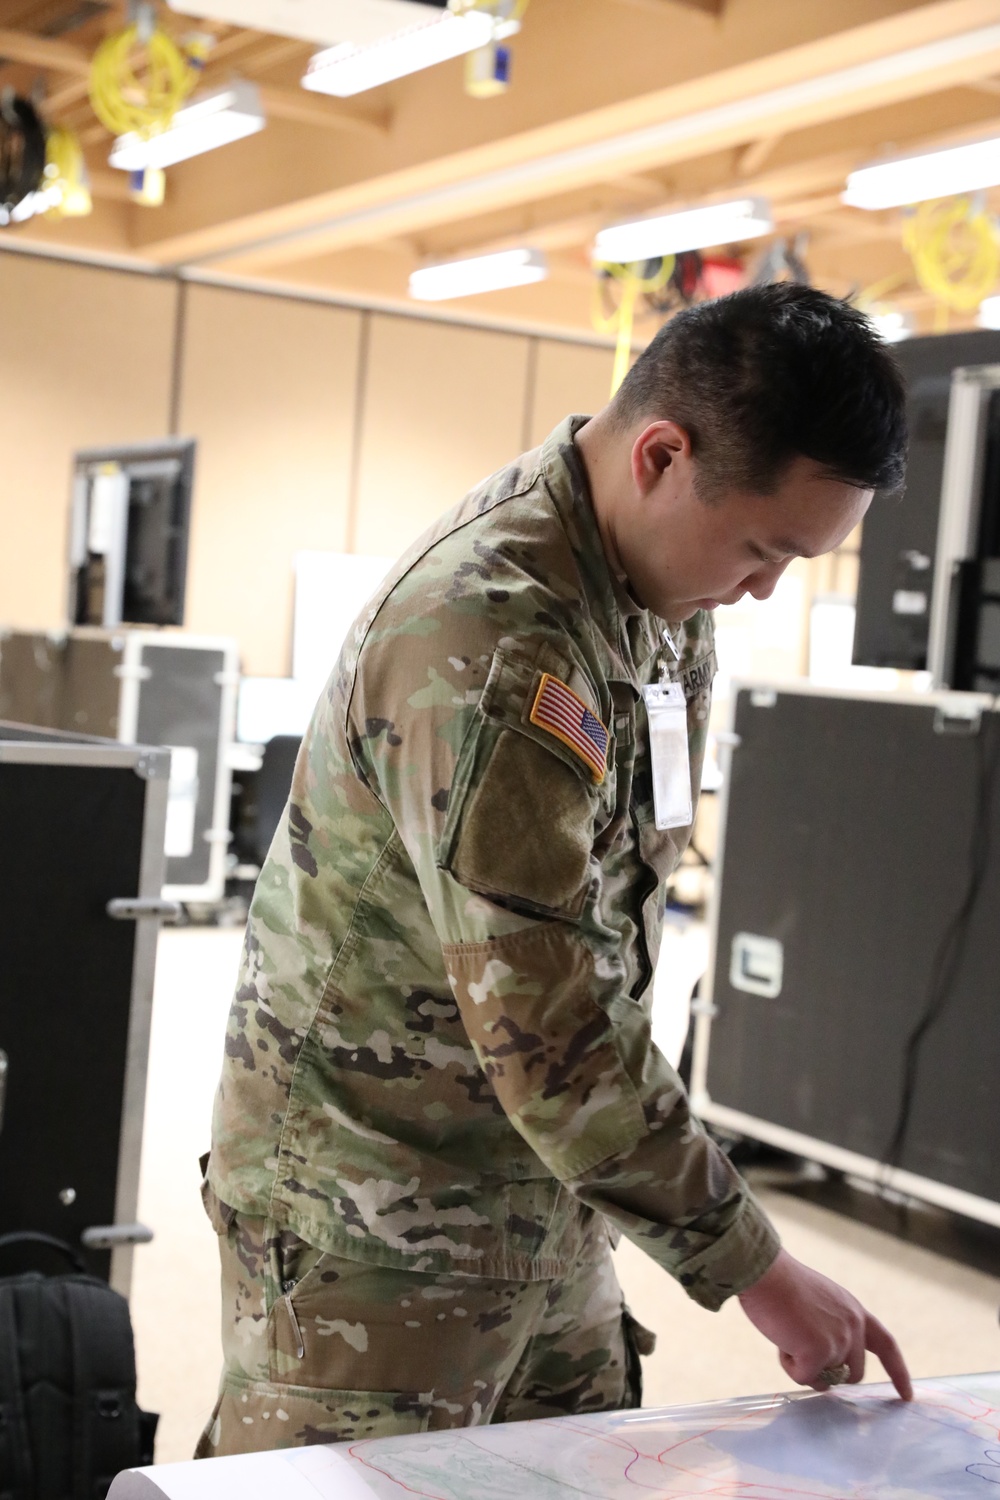 U.S. Army Soldier Maps Out Logistics Operations during Vibrant Response 24